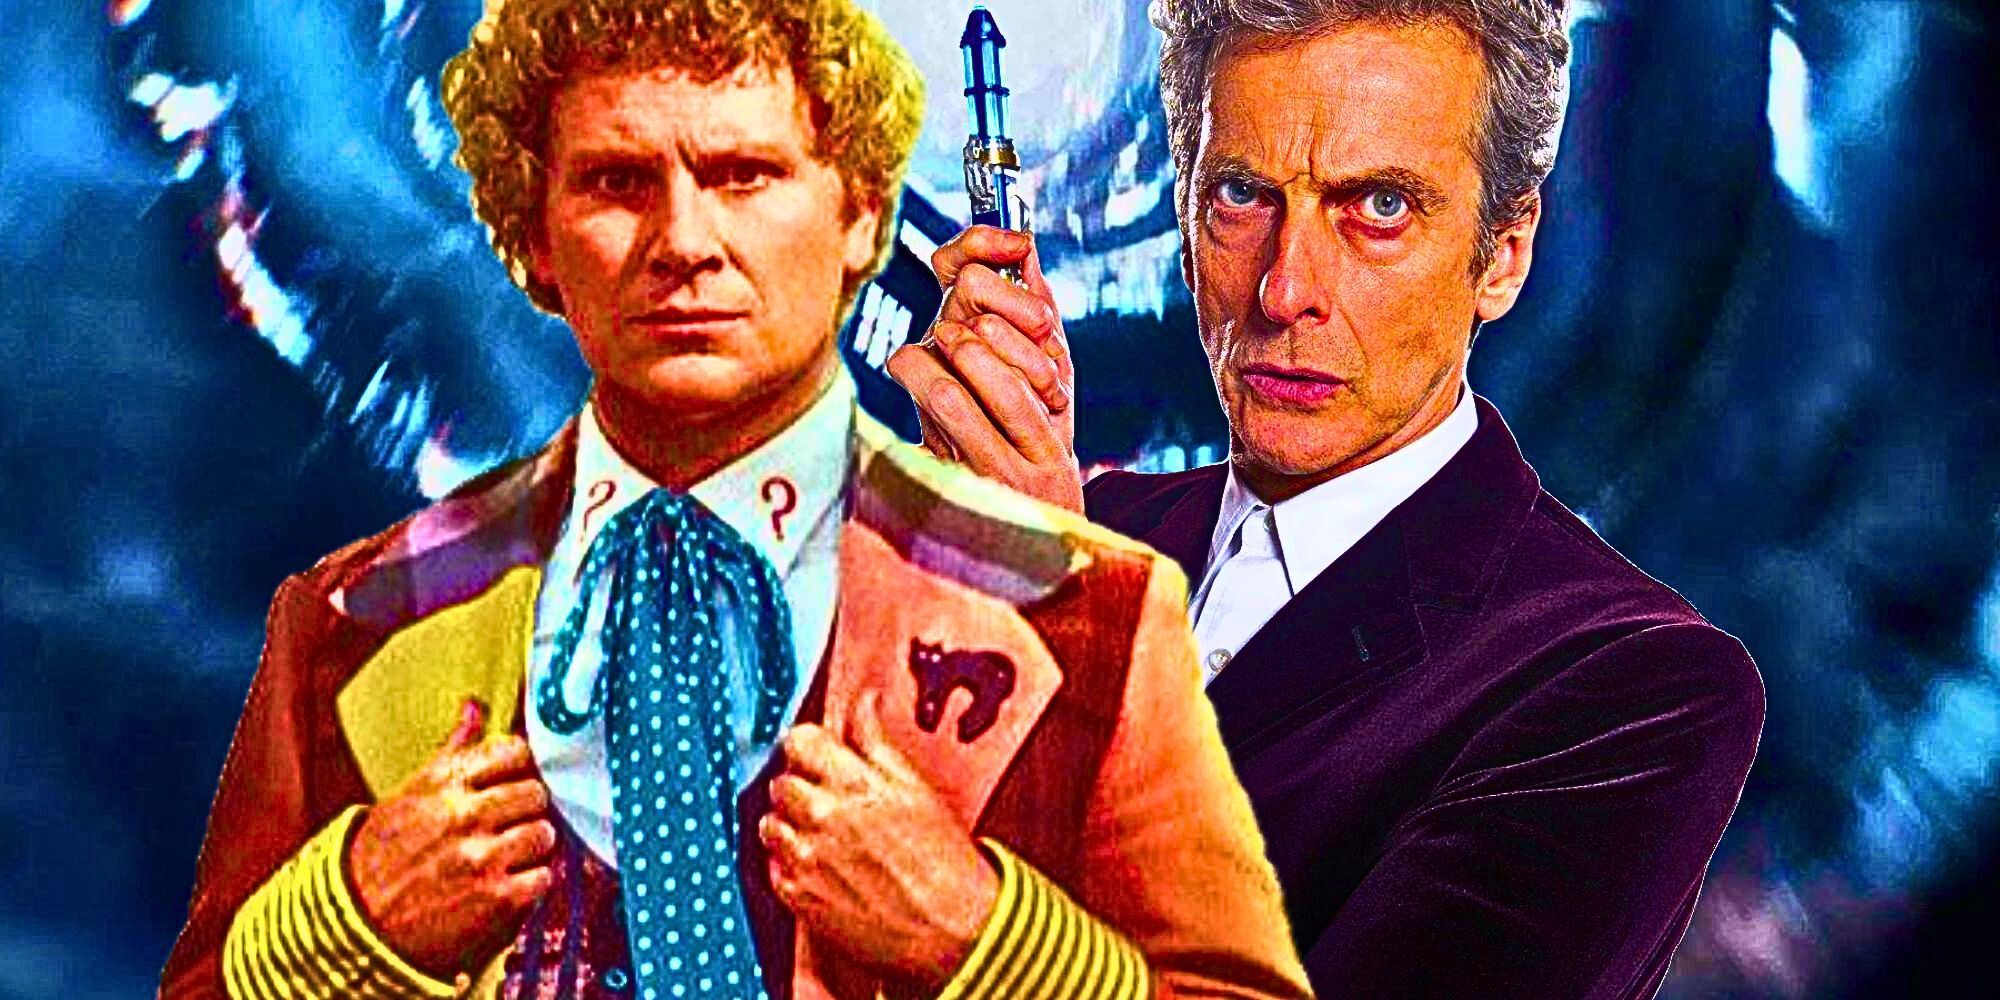 Custom image of Colin Baker's Sixth Doctor and Peter Capaldi's Twelfth Doctor against a backdrop of the time vortex from Doctor Who